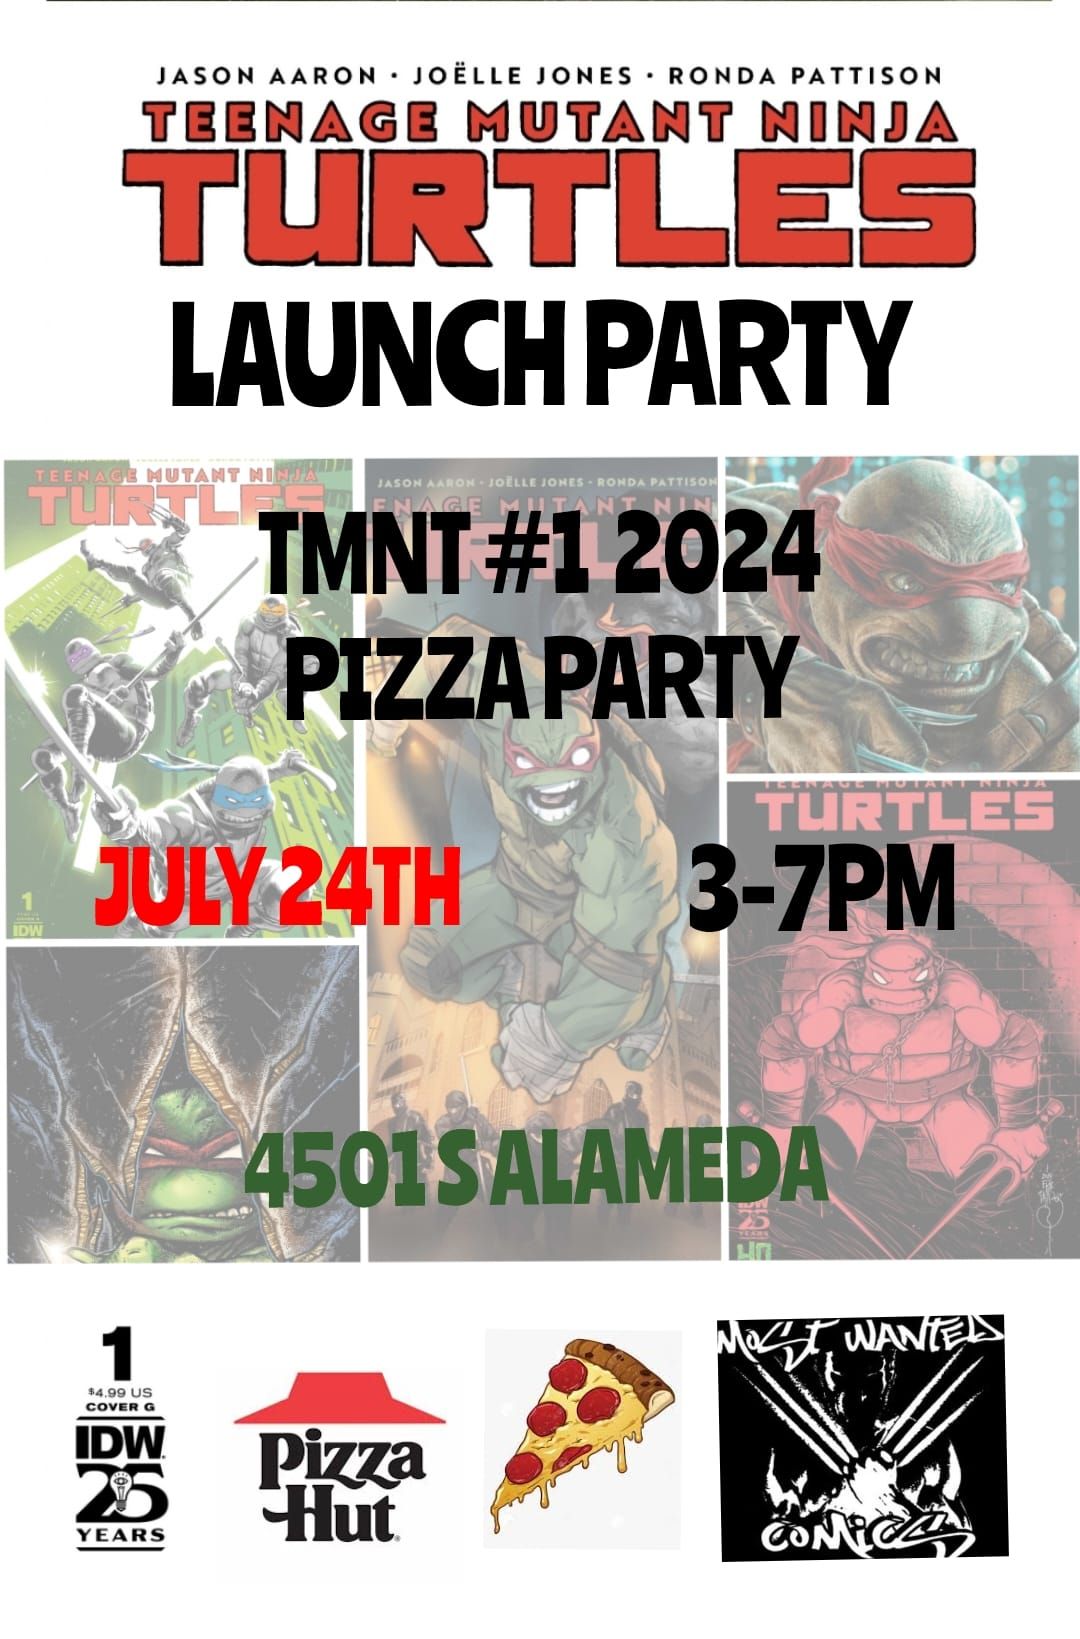 TMNT #1 2024 LAUNCH PARTY